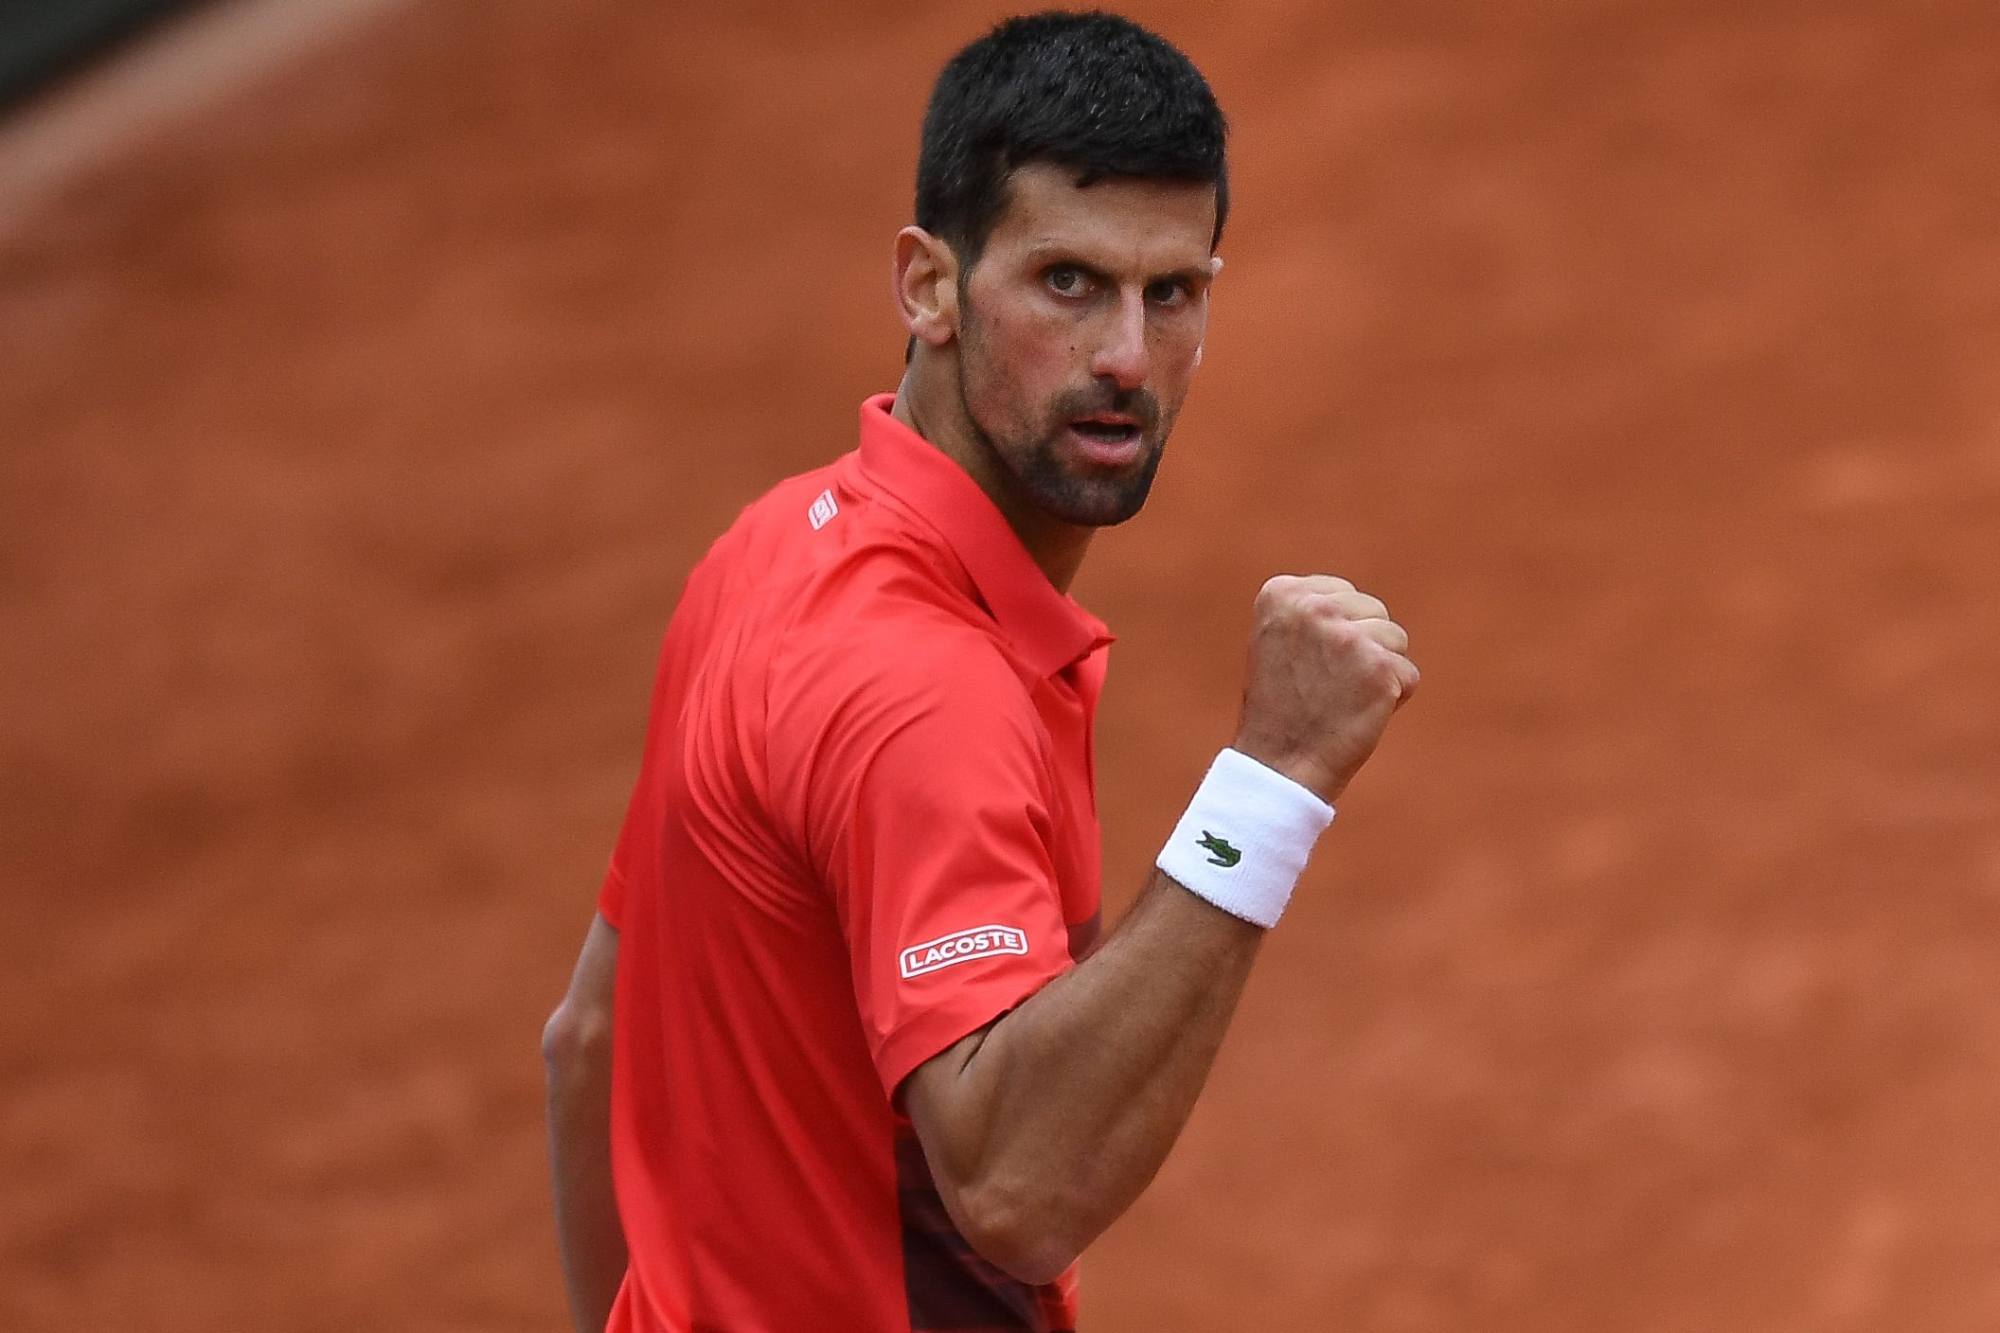 Serbia’s Novak Djokovic at the French Open tournament in May. Photo: AFP